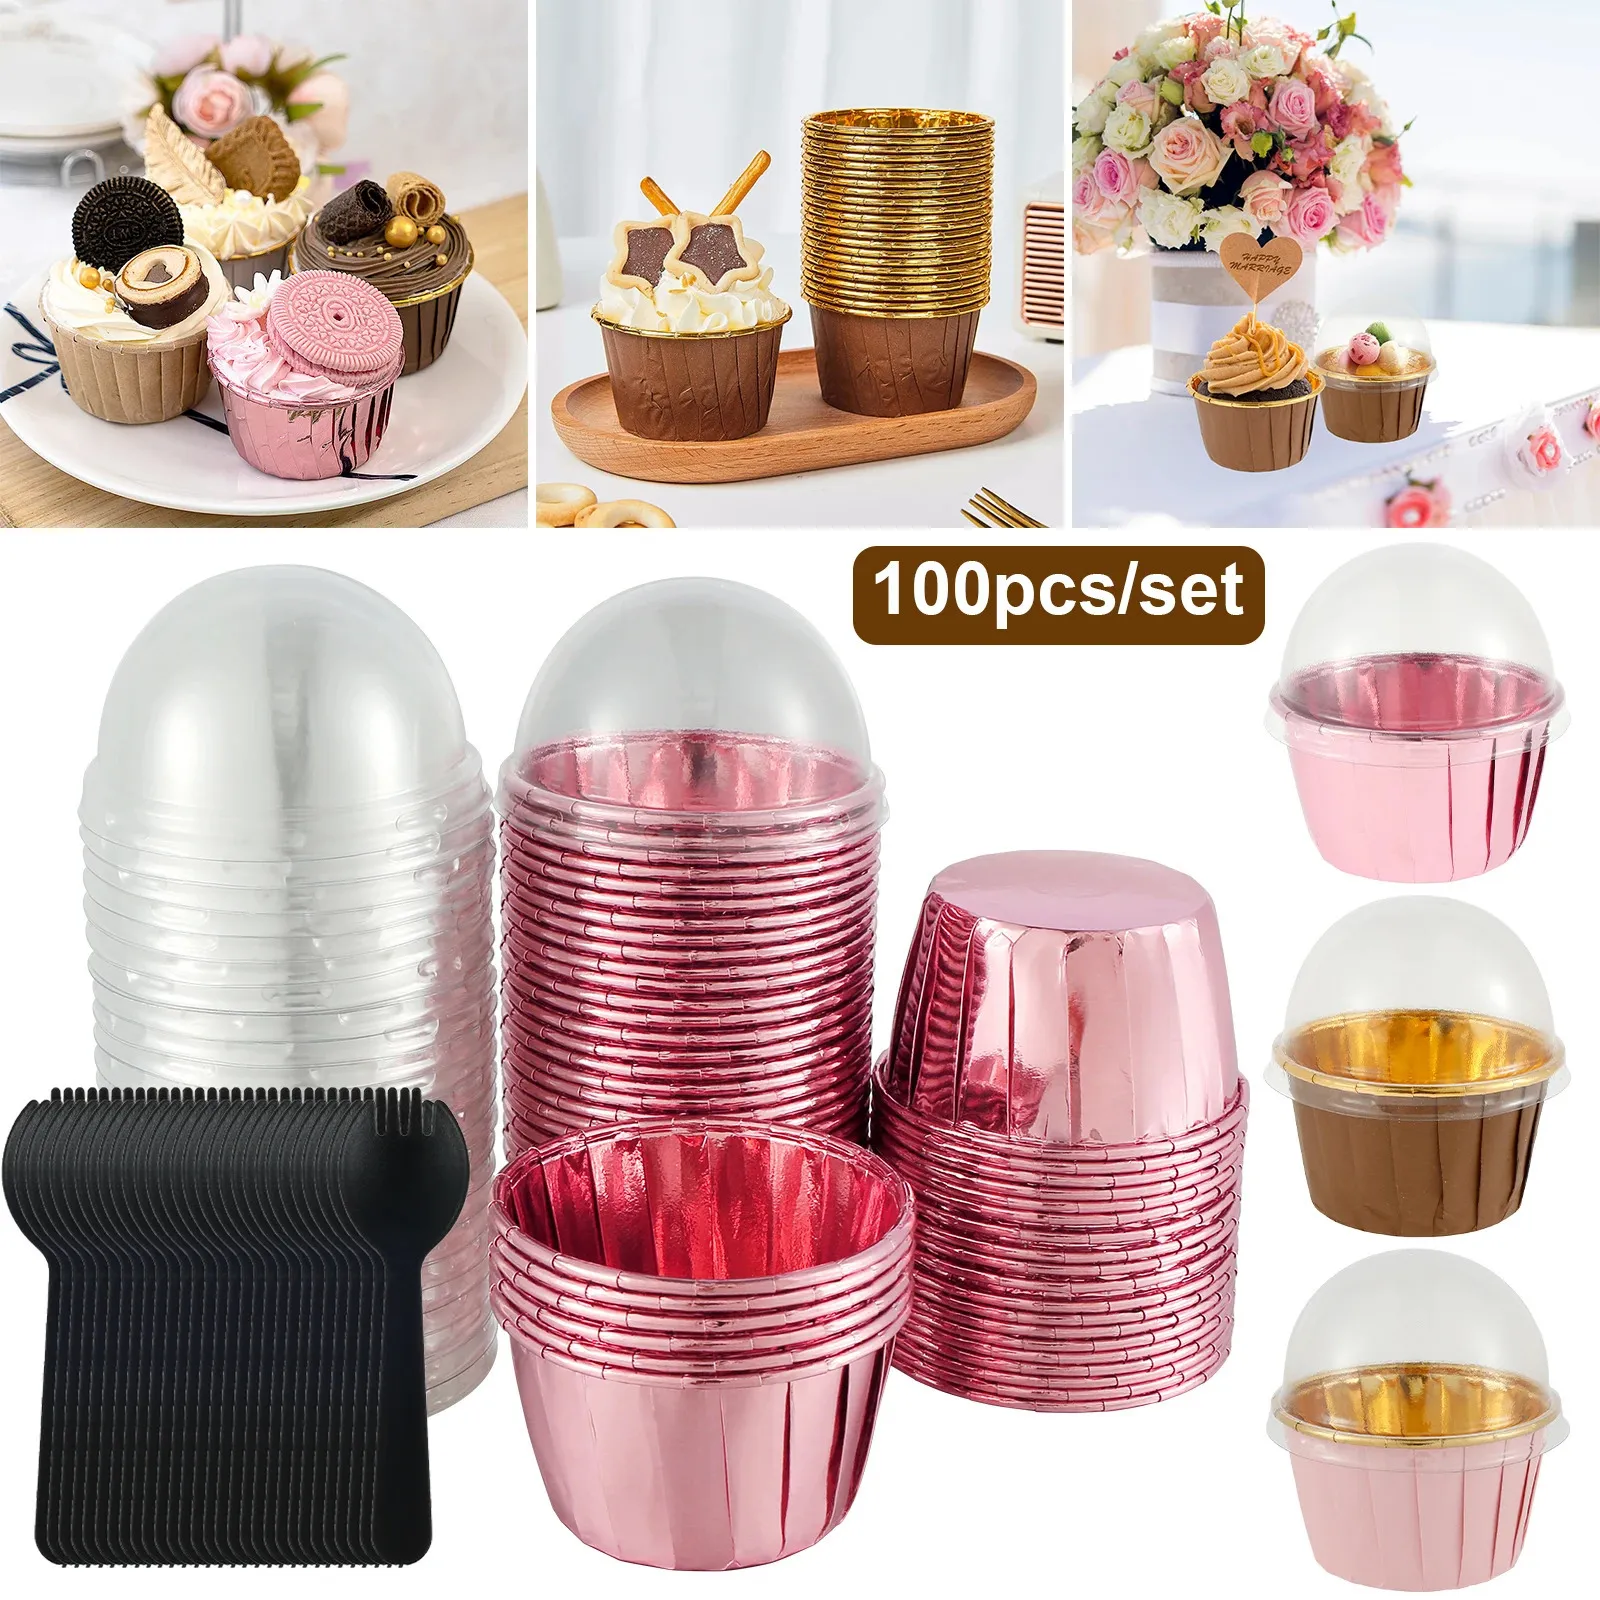 Baking Moulds 100Pcs Aluminum Foil Cupcake Liner Mini Cups Heat Resistant Small Muffin Pie Dessert Container Home Party Cake Supplies 231018